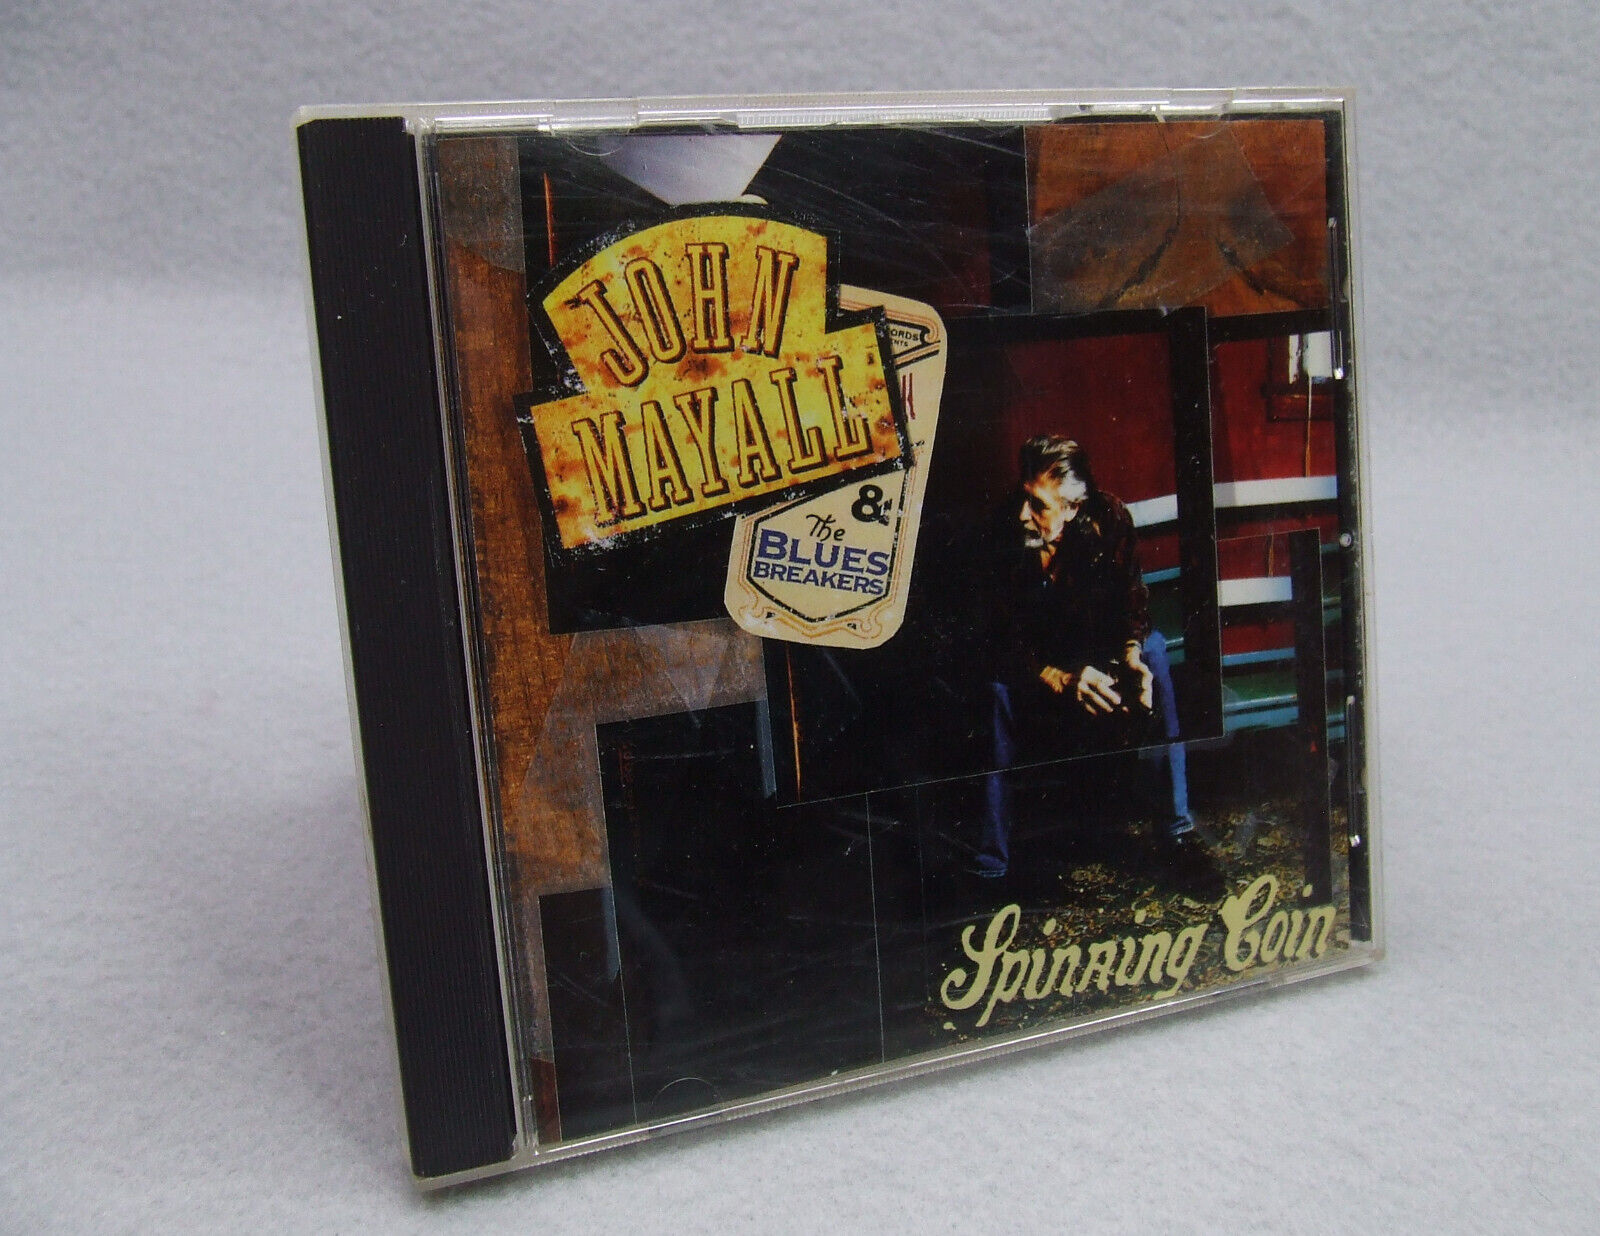 John Mayall & The Blues Breakers - Spinning Coin (CD, 1995 Silvertone Records)